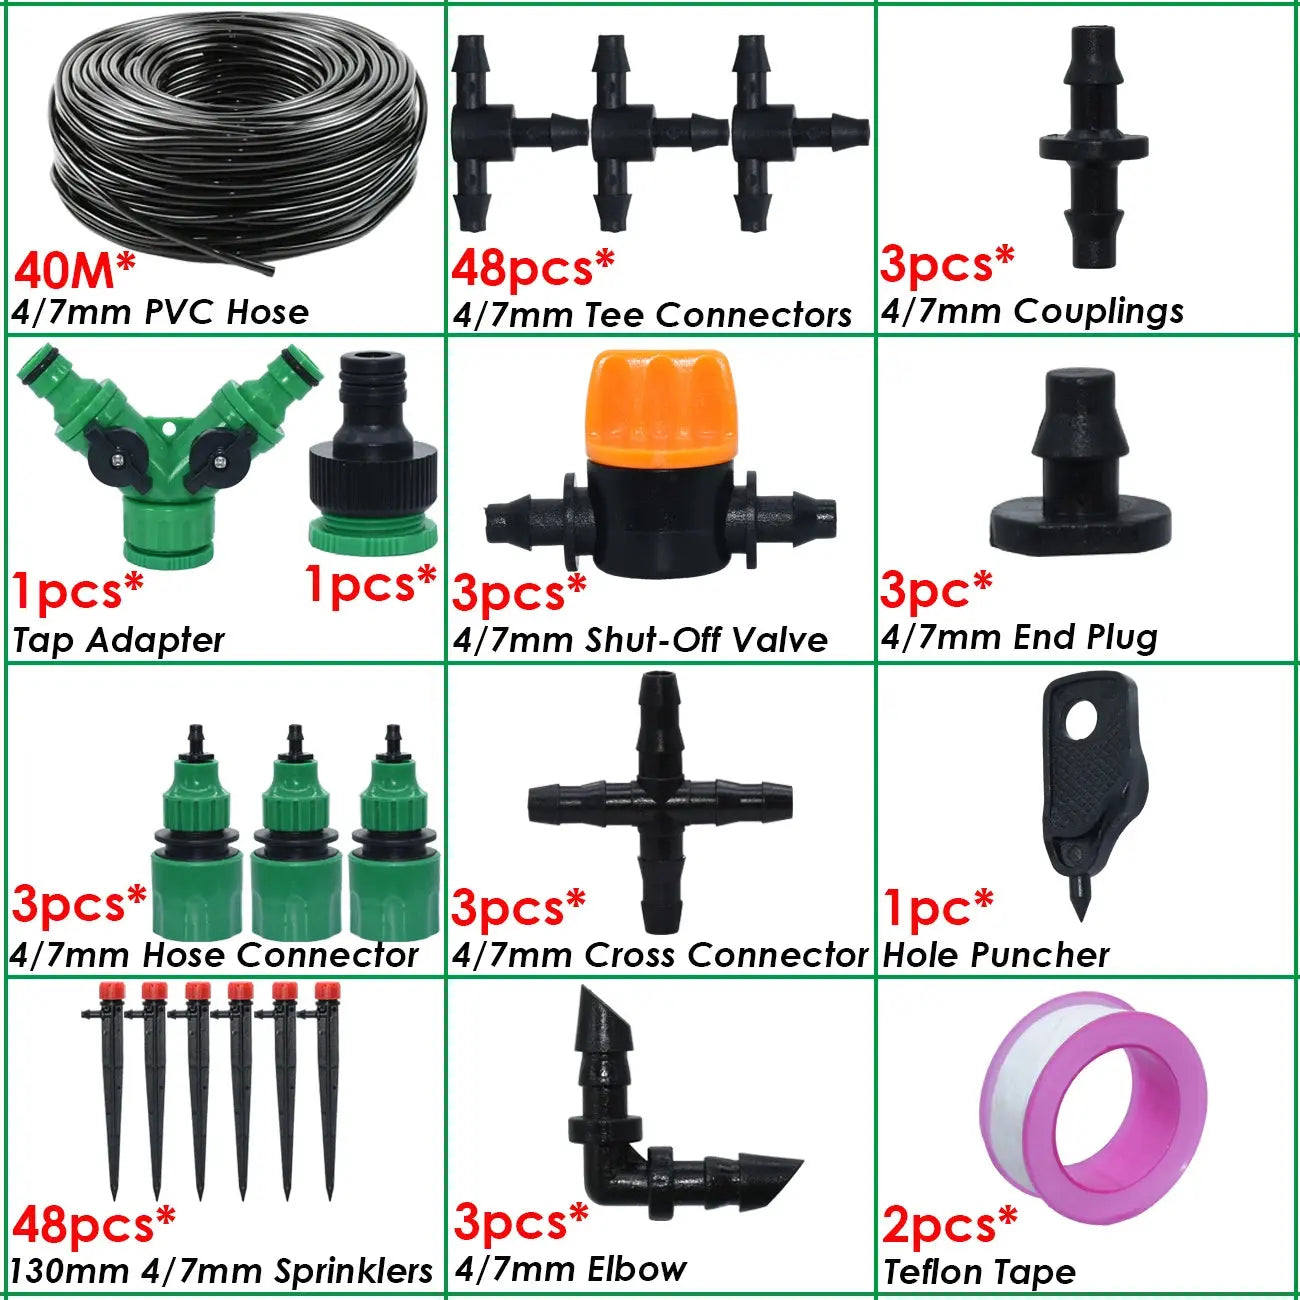 10-50M Garden Automatic Drip Watering Irrigation Kit System 4/7mm Hose 1/4'' Mist Nozzle Sprinkler for Lawn Pot Plant Greenhouse - The Greenhouse Pros